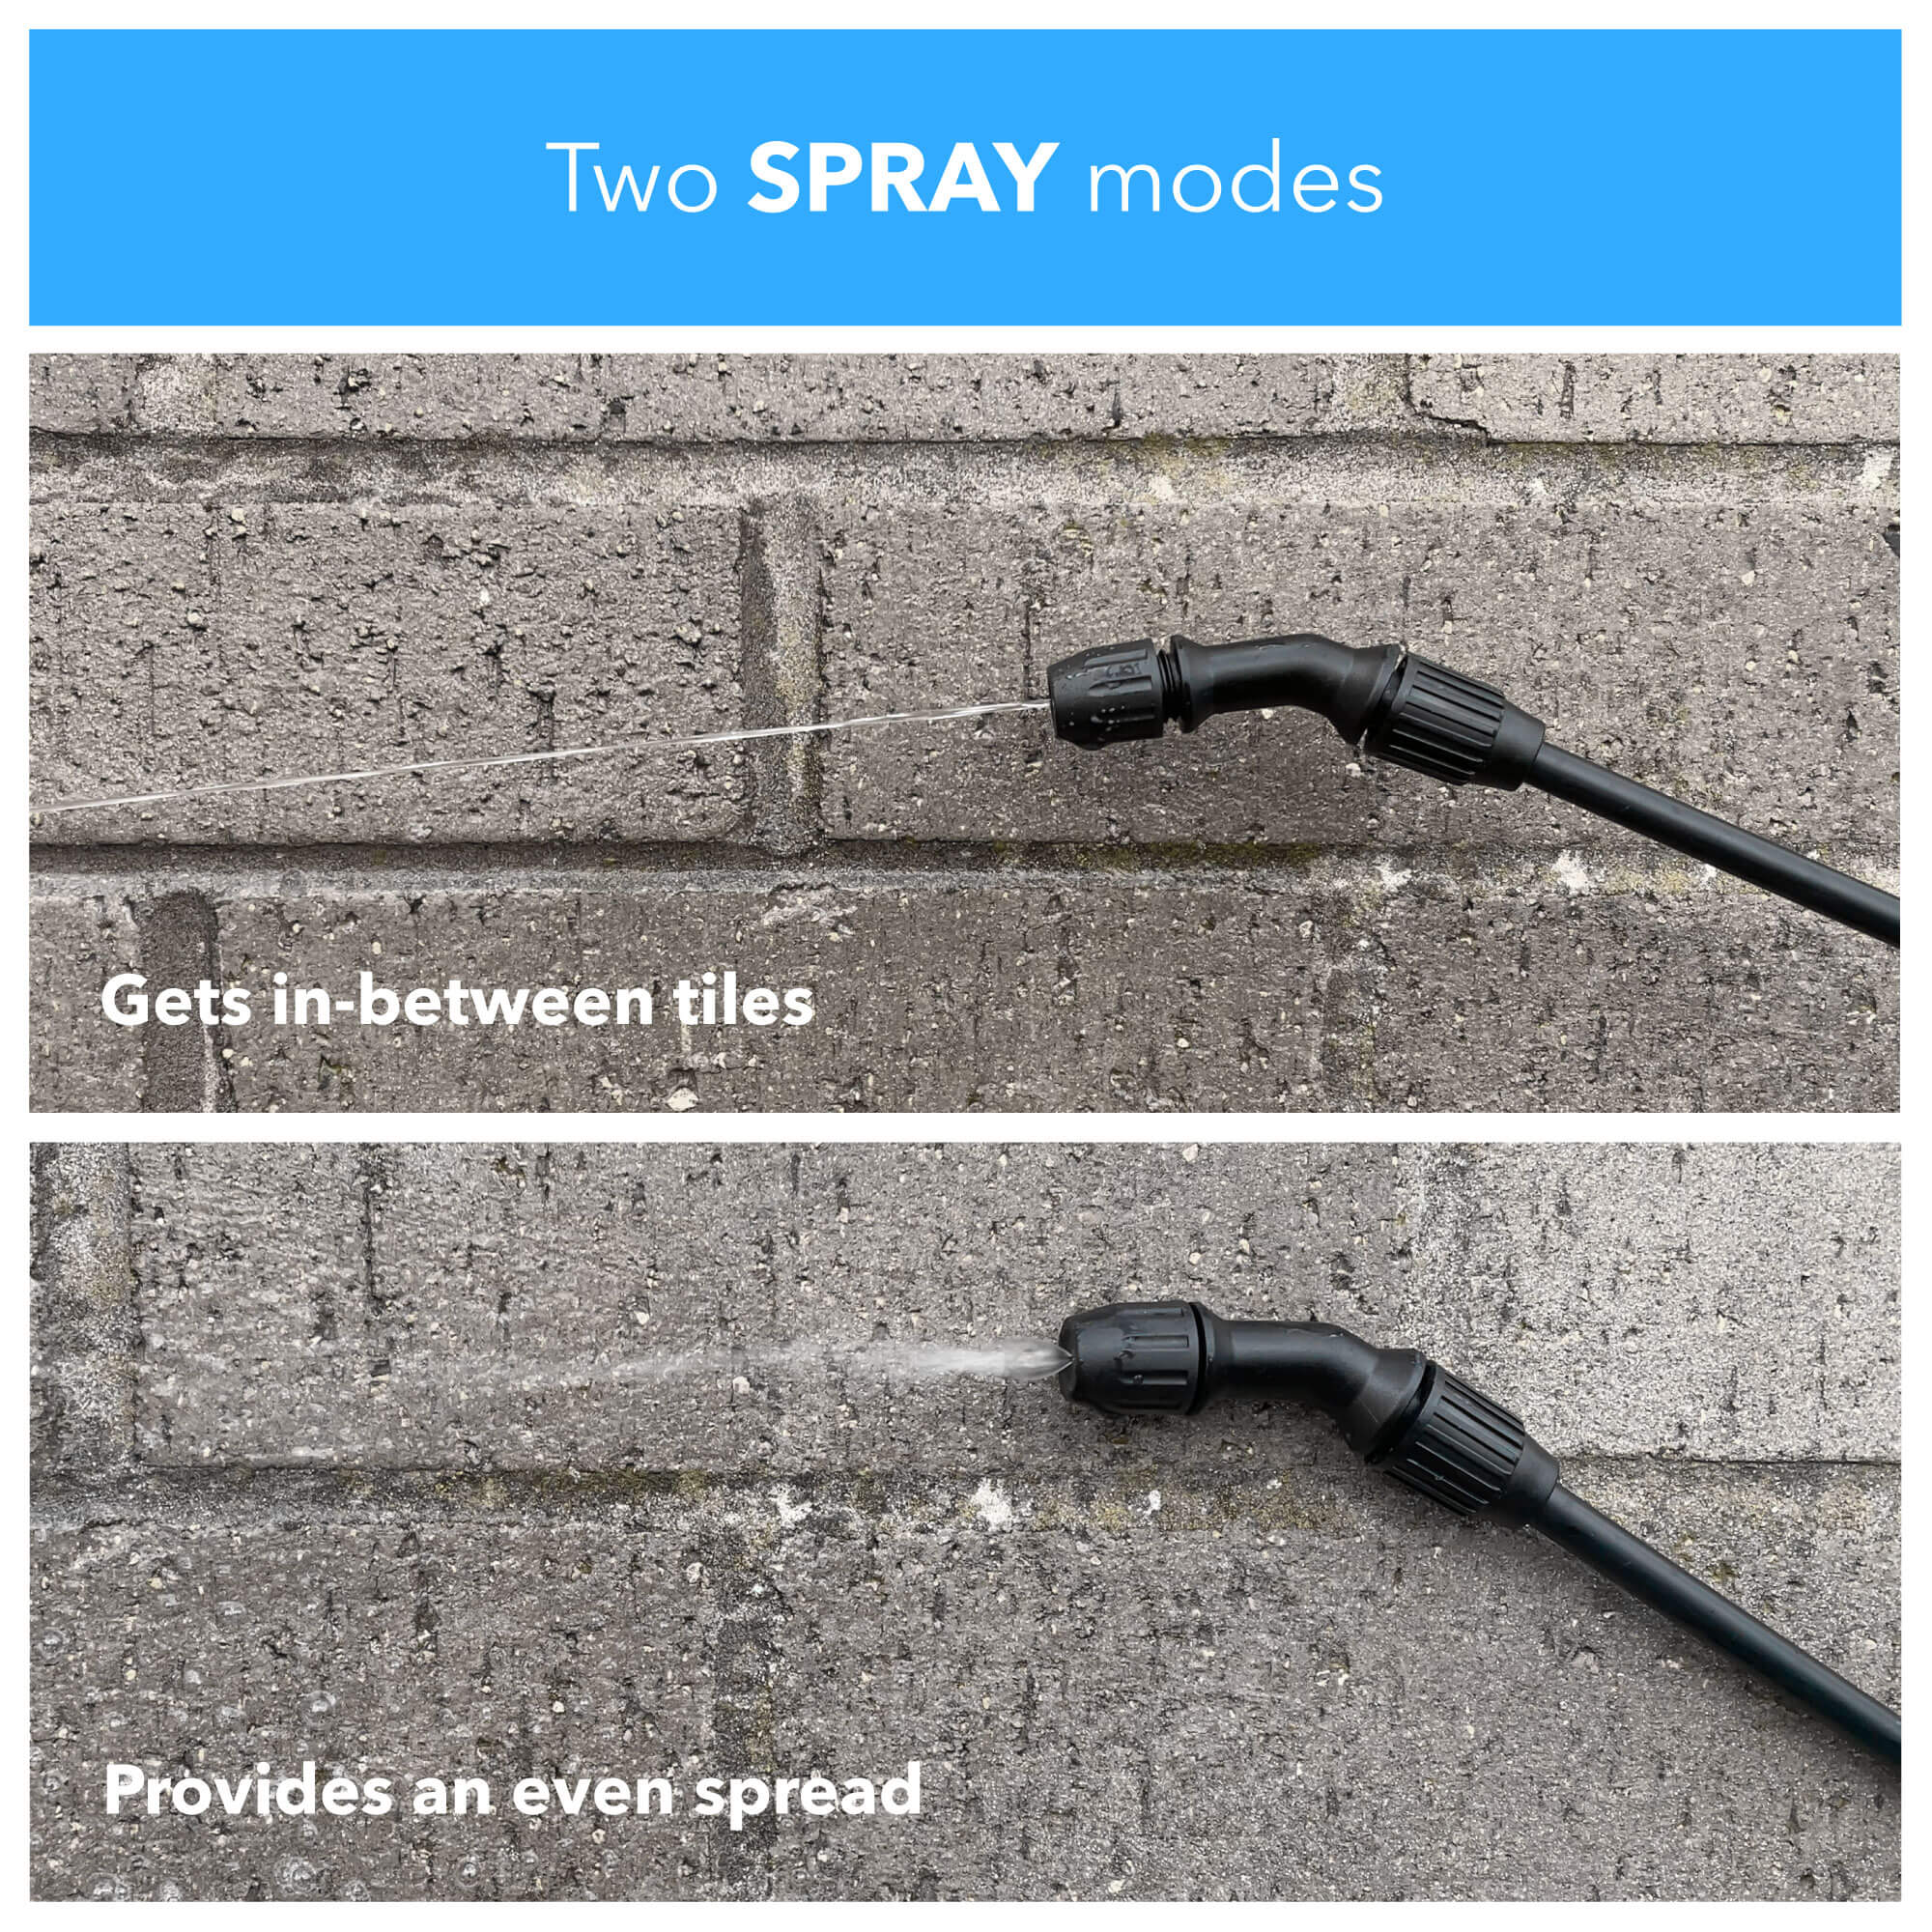 Two spray modes, one gets in between tiles, the other provides an even spread